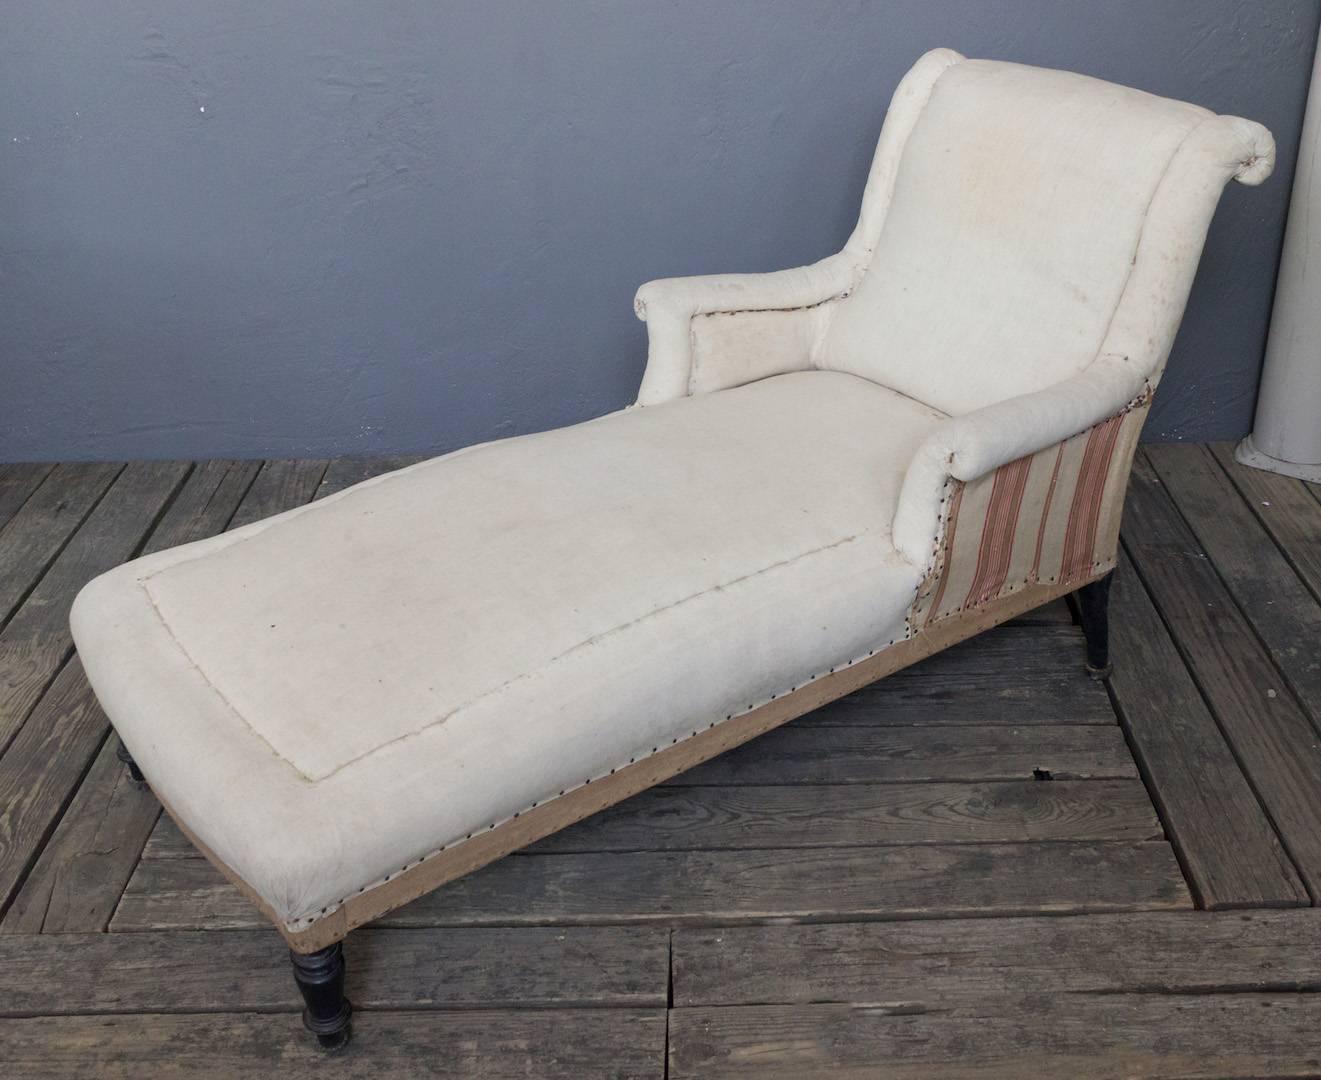 19th century French chaise longue with curved arms and scrolled back resting on turned wood legs. Sold as is.